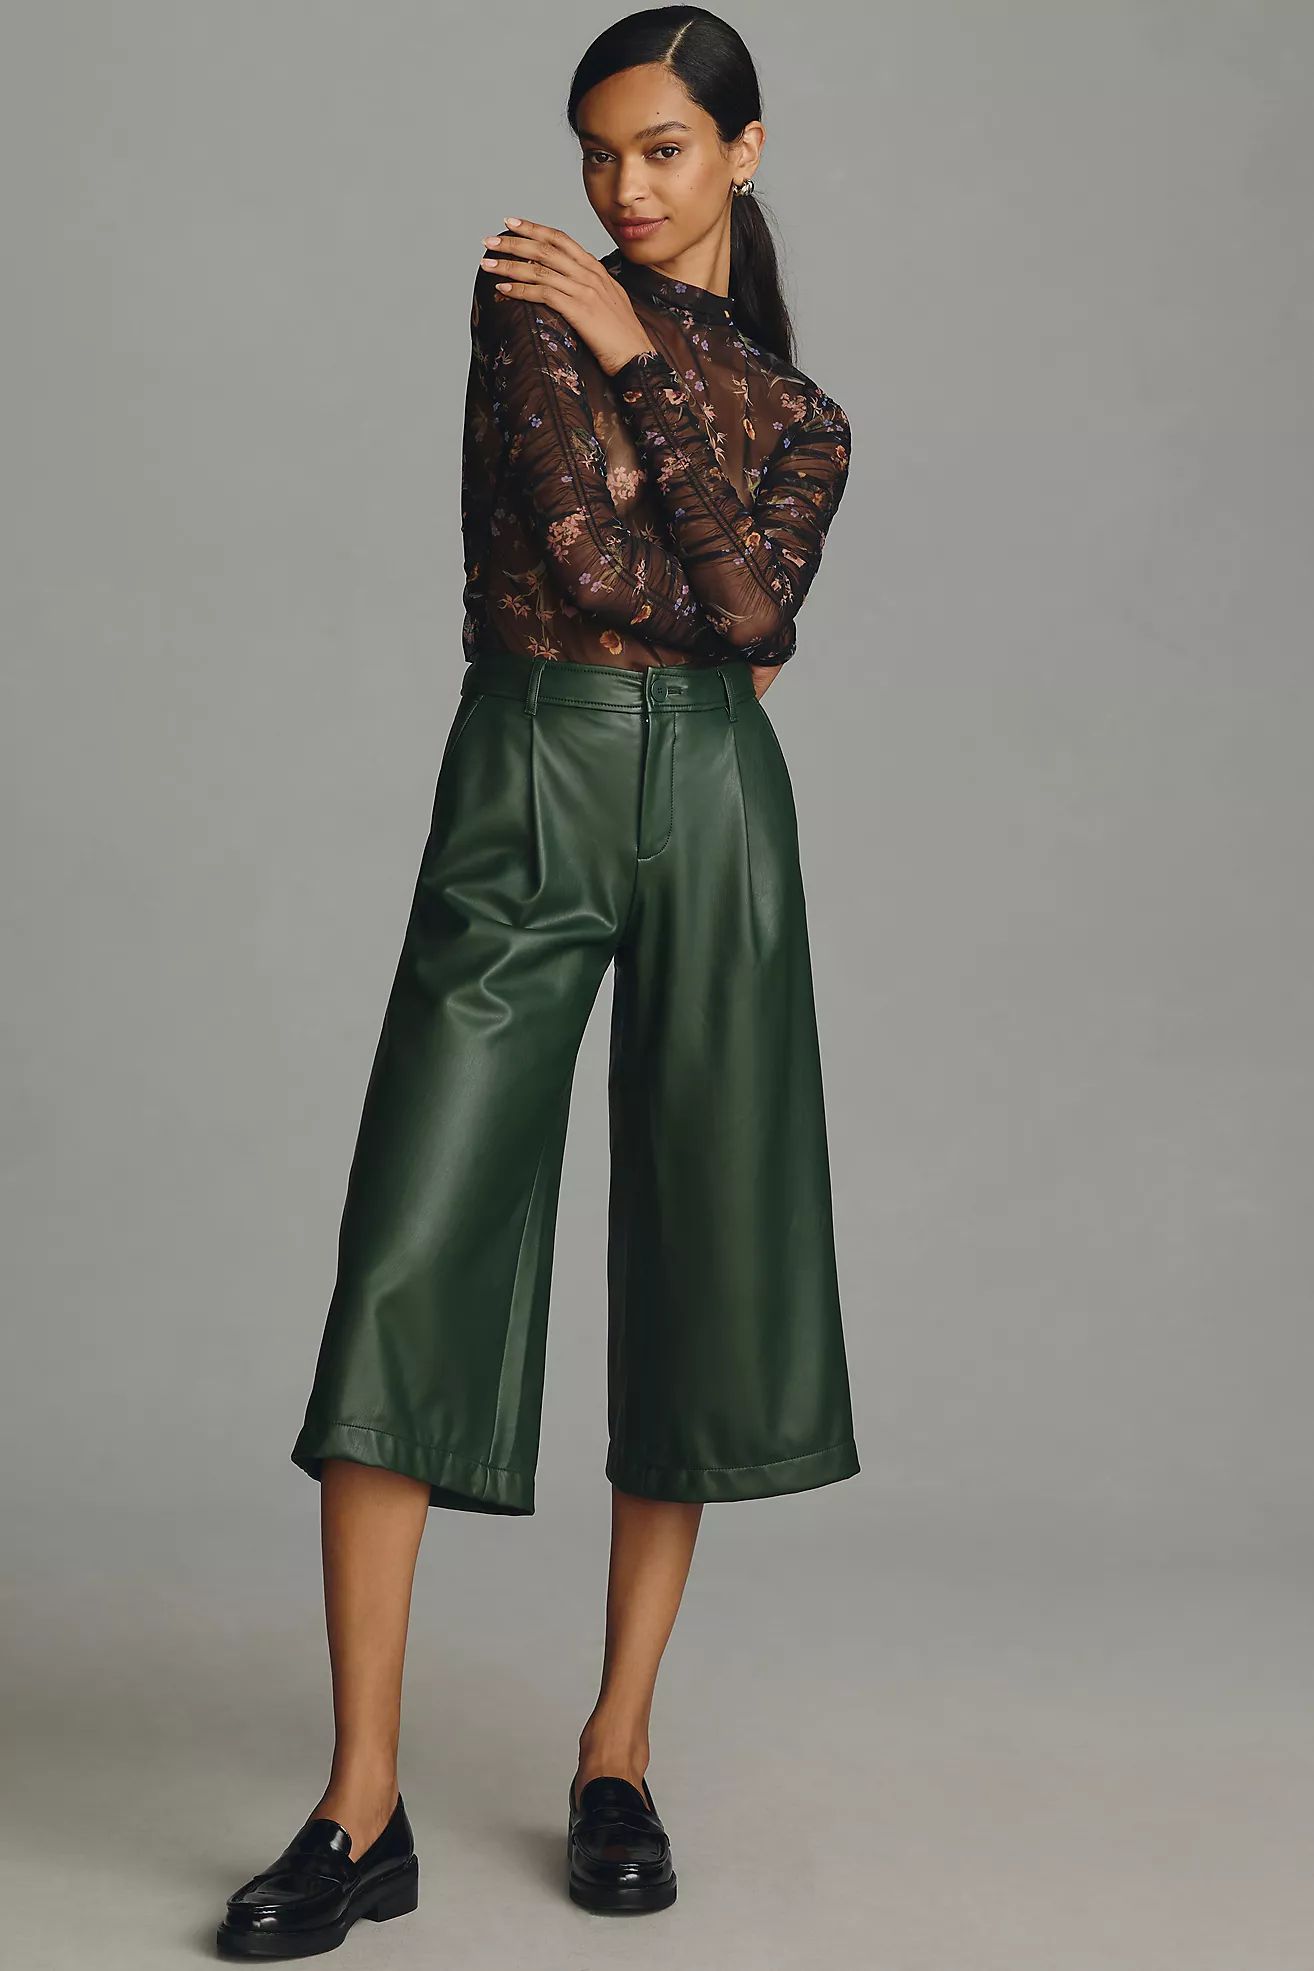 By Anthropologie Faux Leather Culottes | Anthropologie (US)